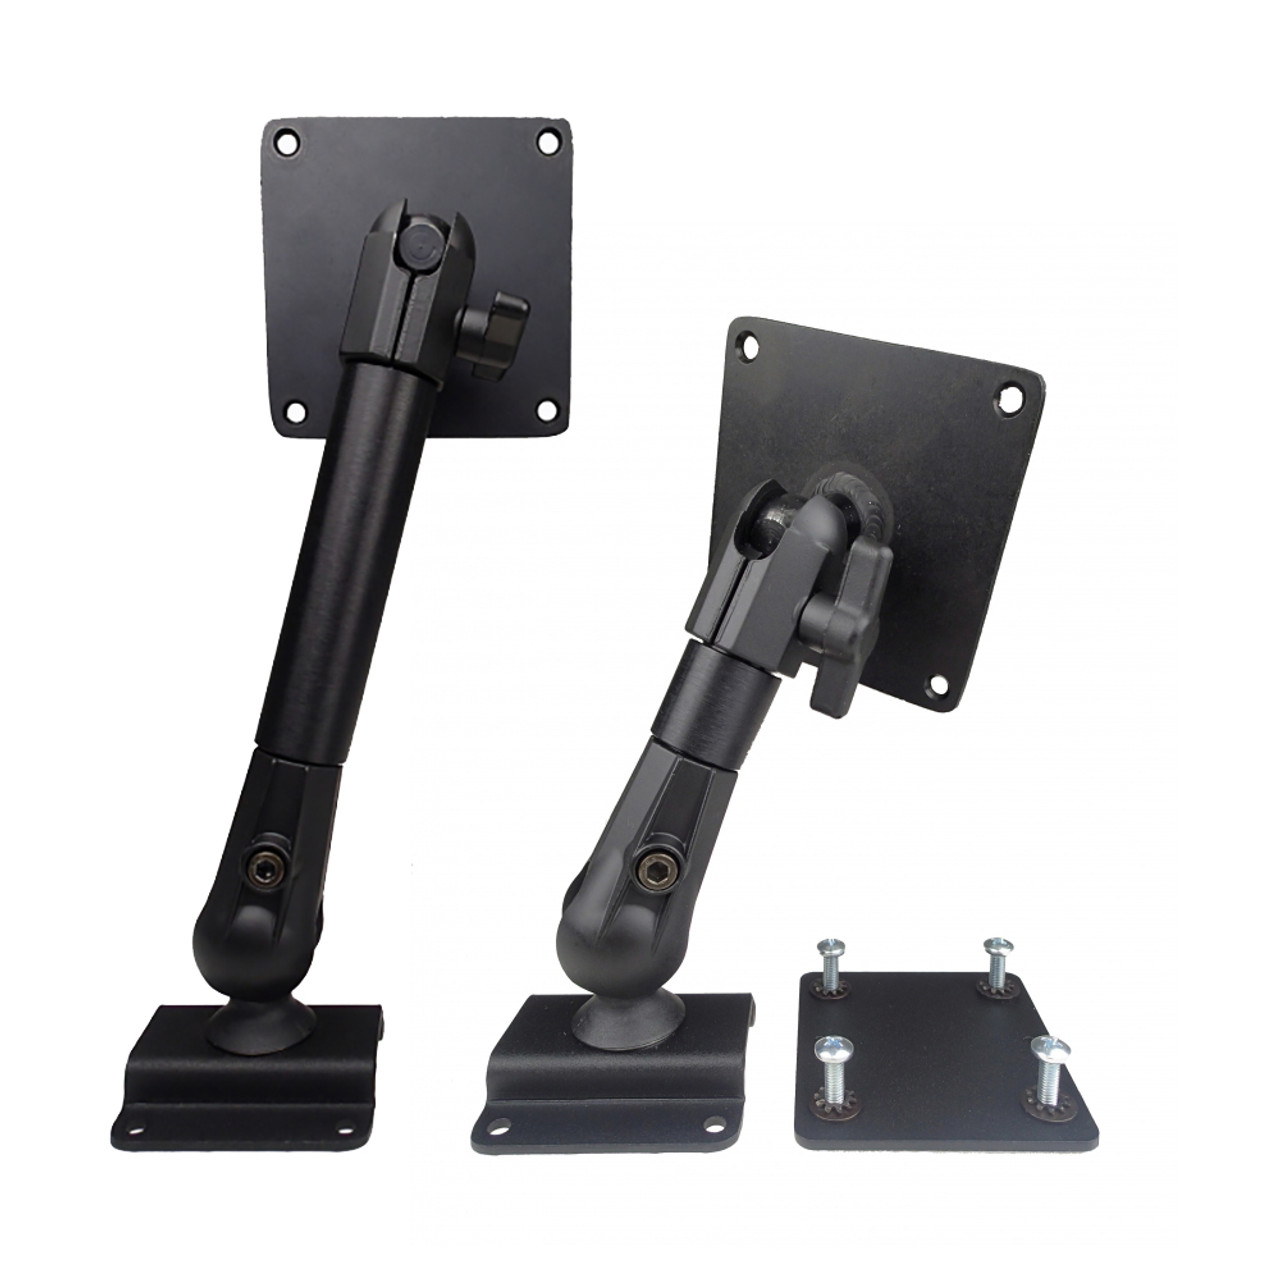 Havis C-MD-400 Universal Rugged Articulating Dual Ball Mount for Tablet Devices